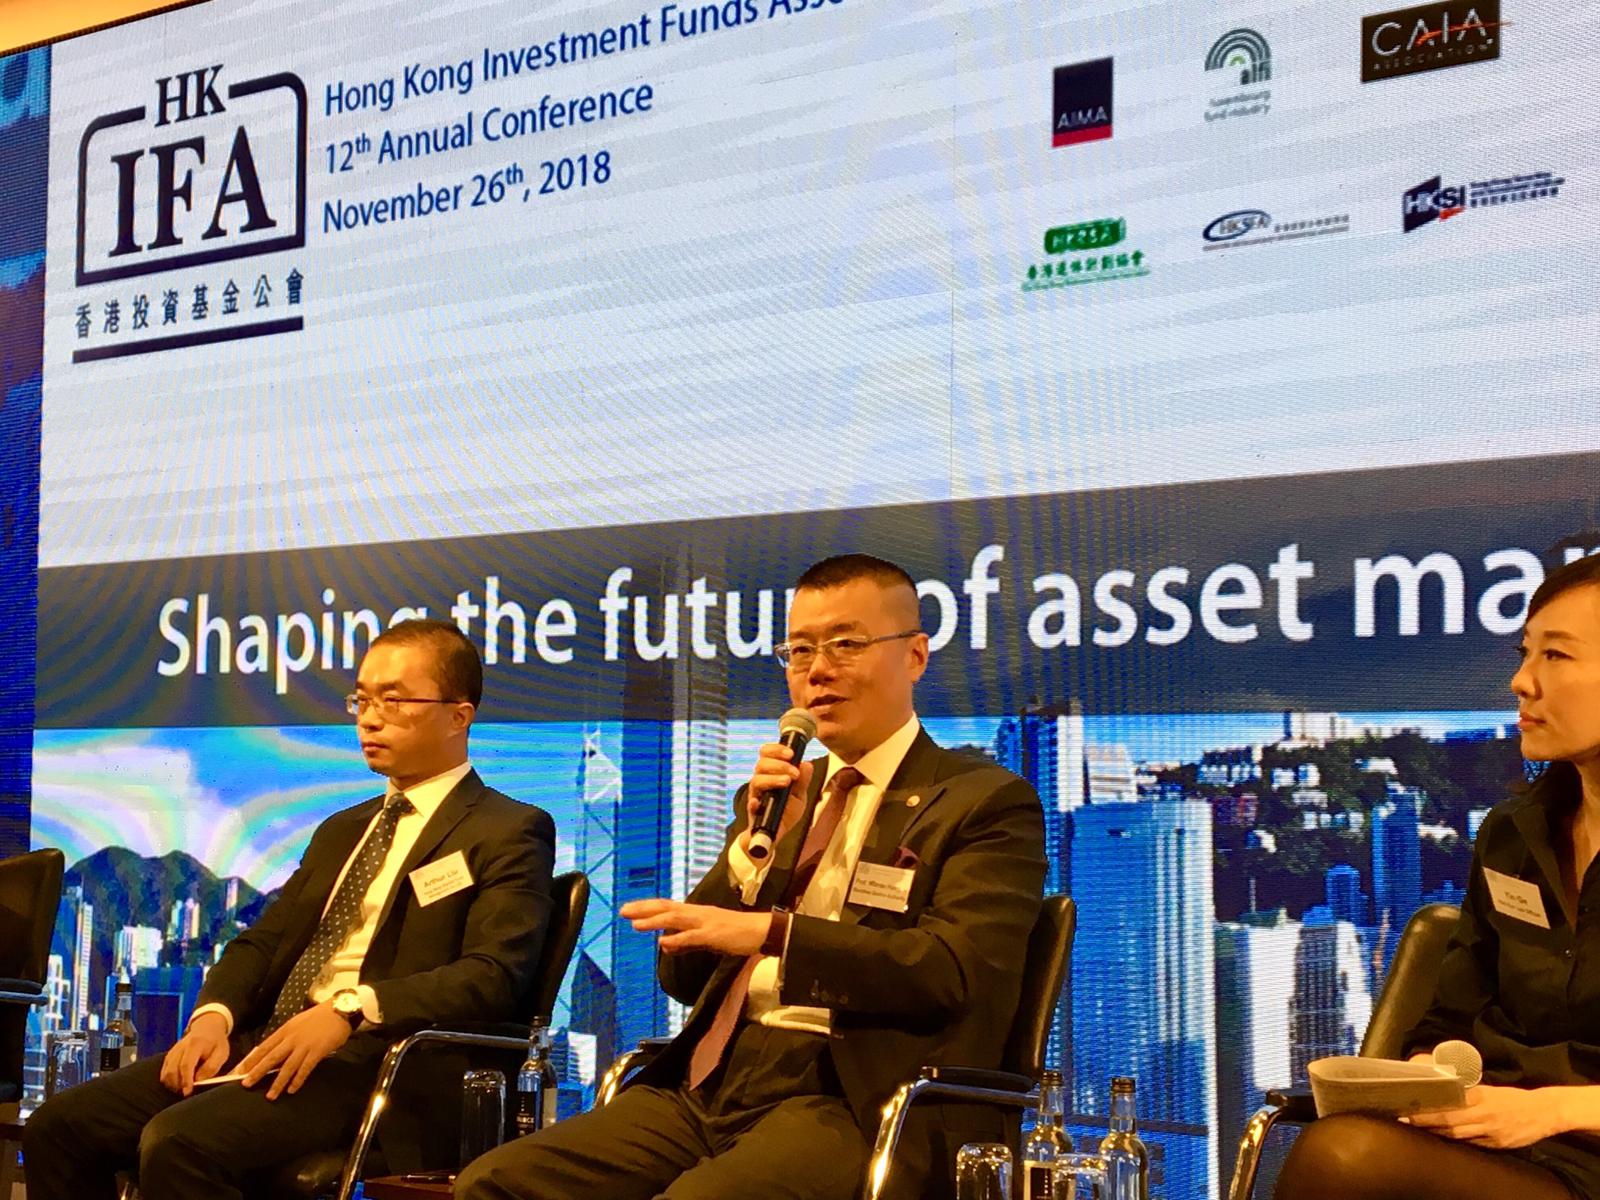 Hong Kong Investment Funds Association 12th Annual Conference